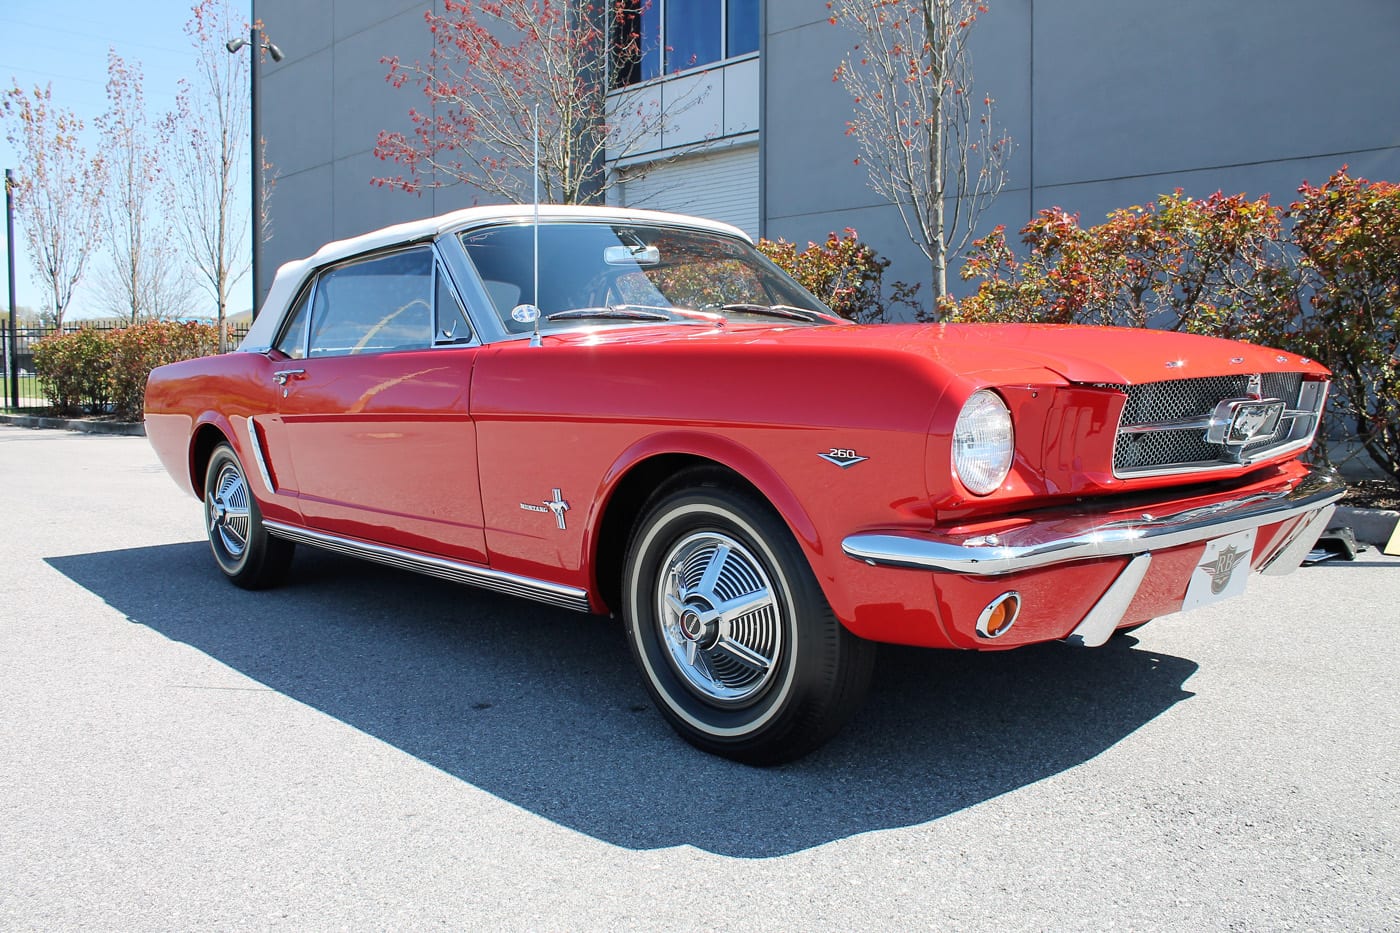 A classic red Ford Mustang convertible with a white top viewed from the front passenger side.